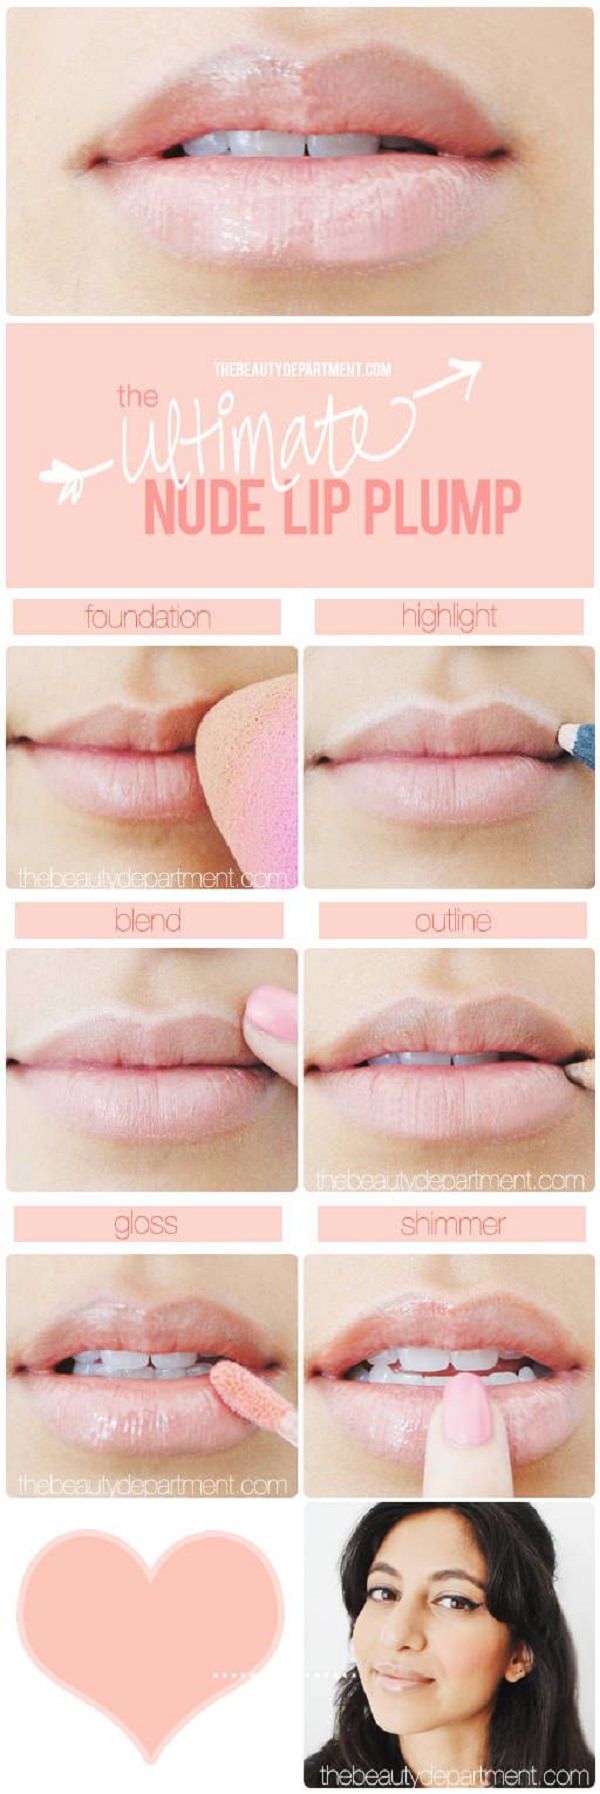 The nude lip trend never goes out of fashion and looks sexy. Here're the 13 makeup ideas and tutorials with nude lips that you can copy and save. Must see!